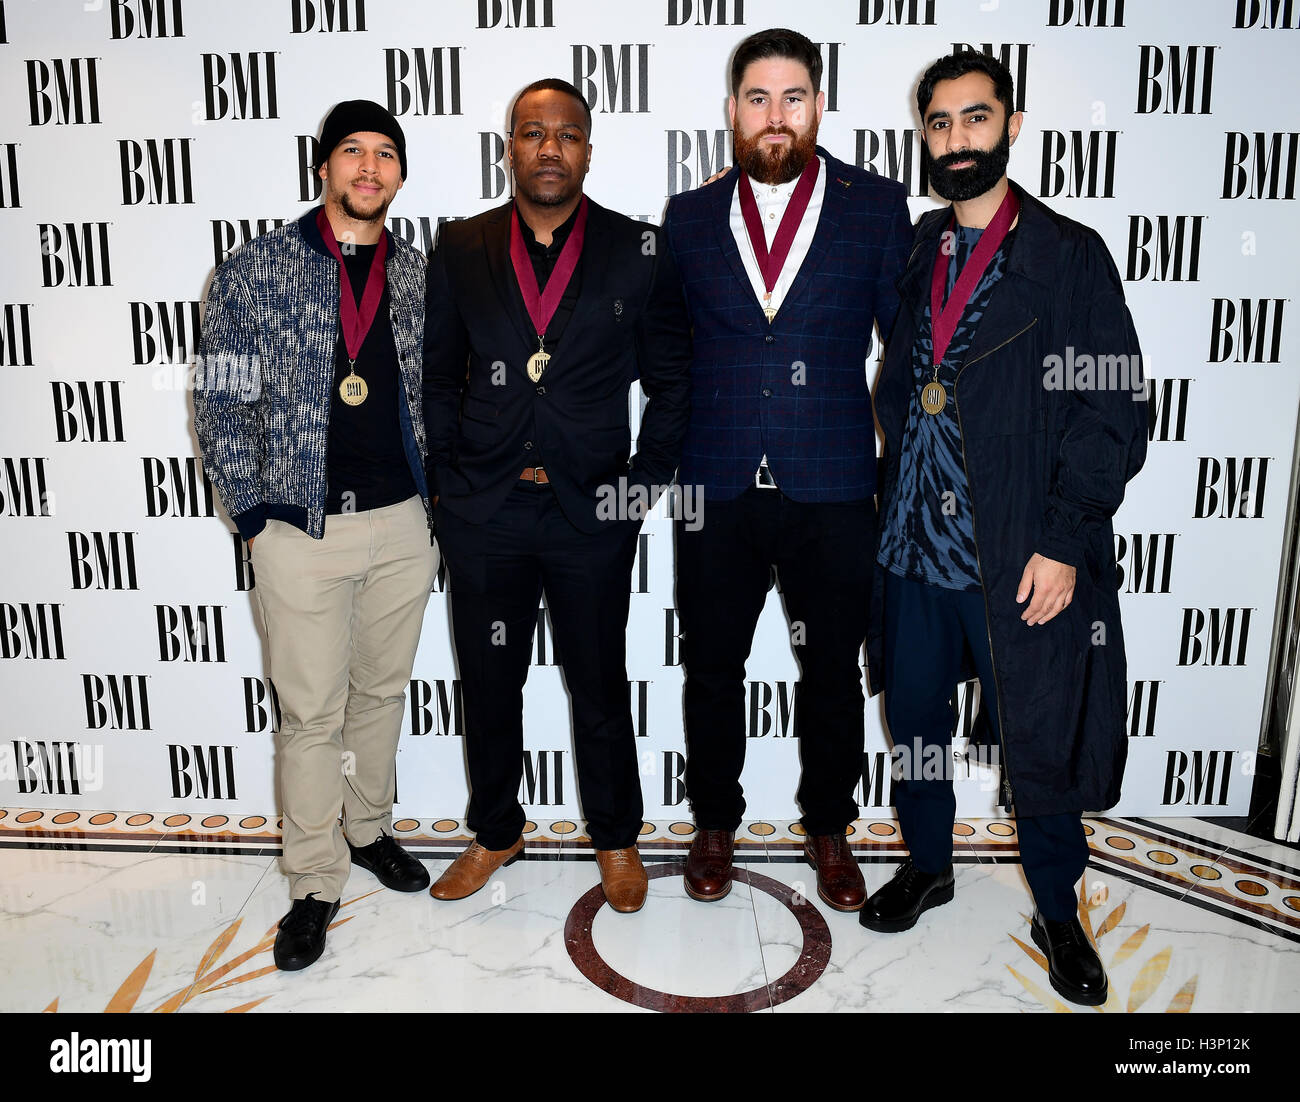 Rudimental's Kesi Dryden (left), DJ Locksmith (second left), Piers Agget (second right) and Amir Amor (right) attending the BMI London Awards at the Dorchester Hotel, London. Stock Photo